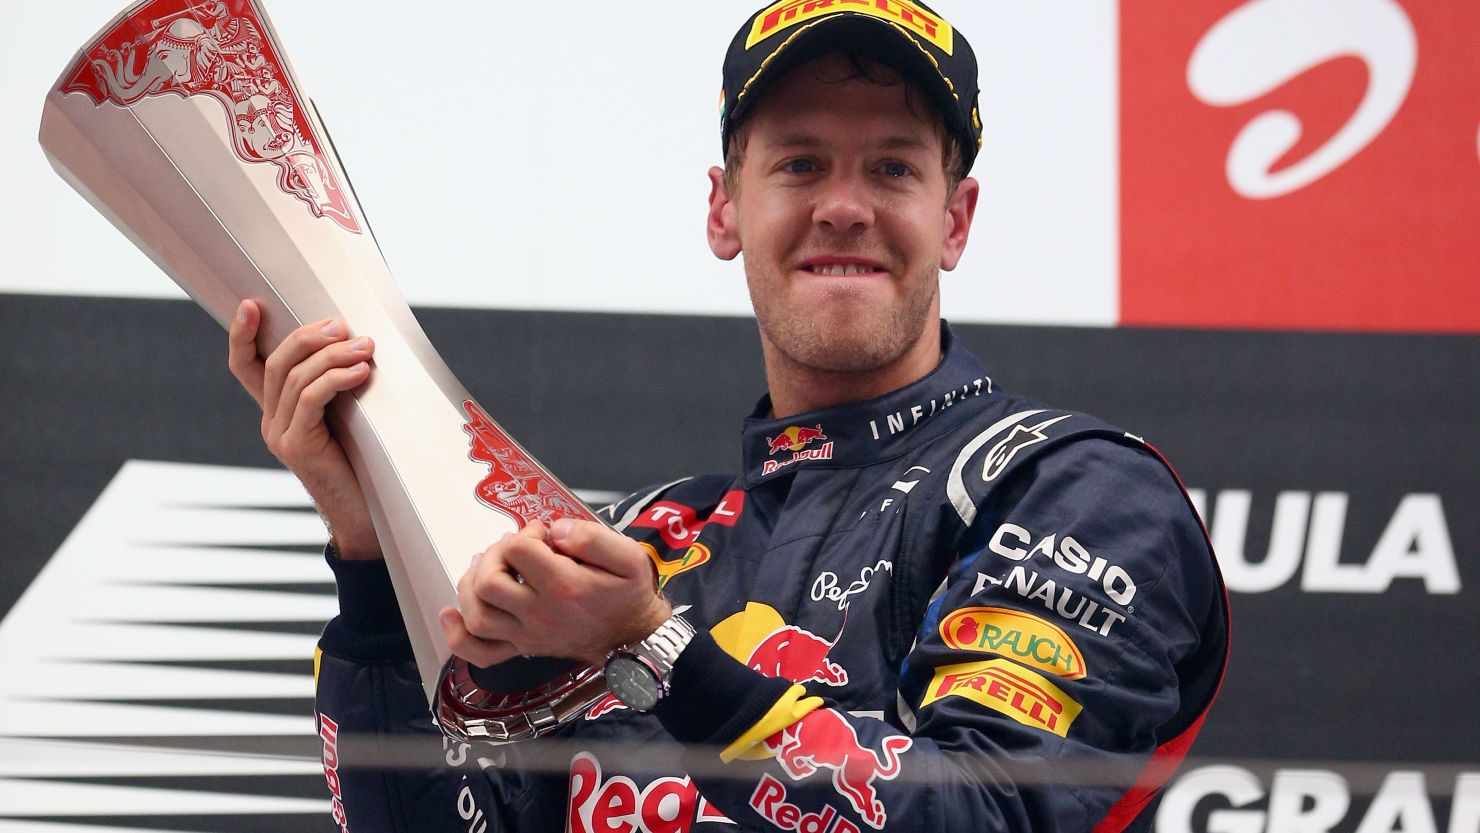 Sebastian Vettel was winning in India for the second straight year for Red Bull.